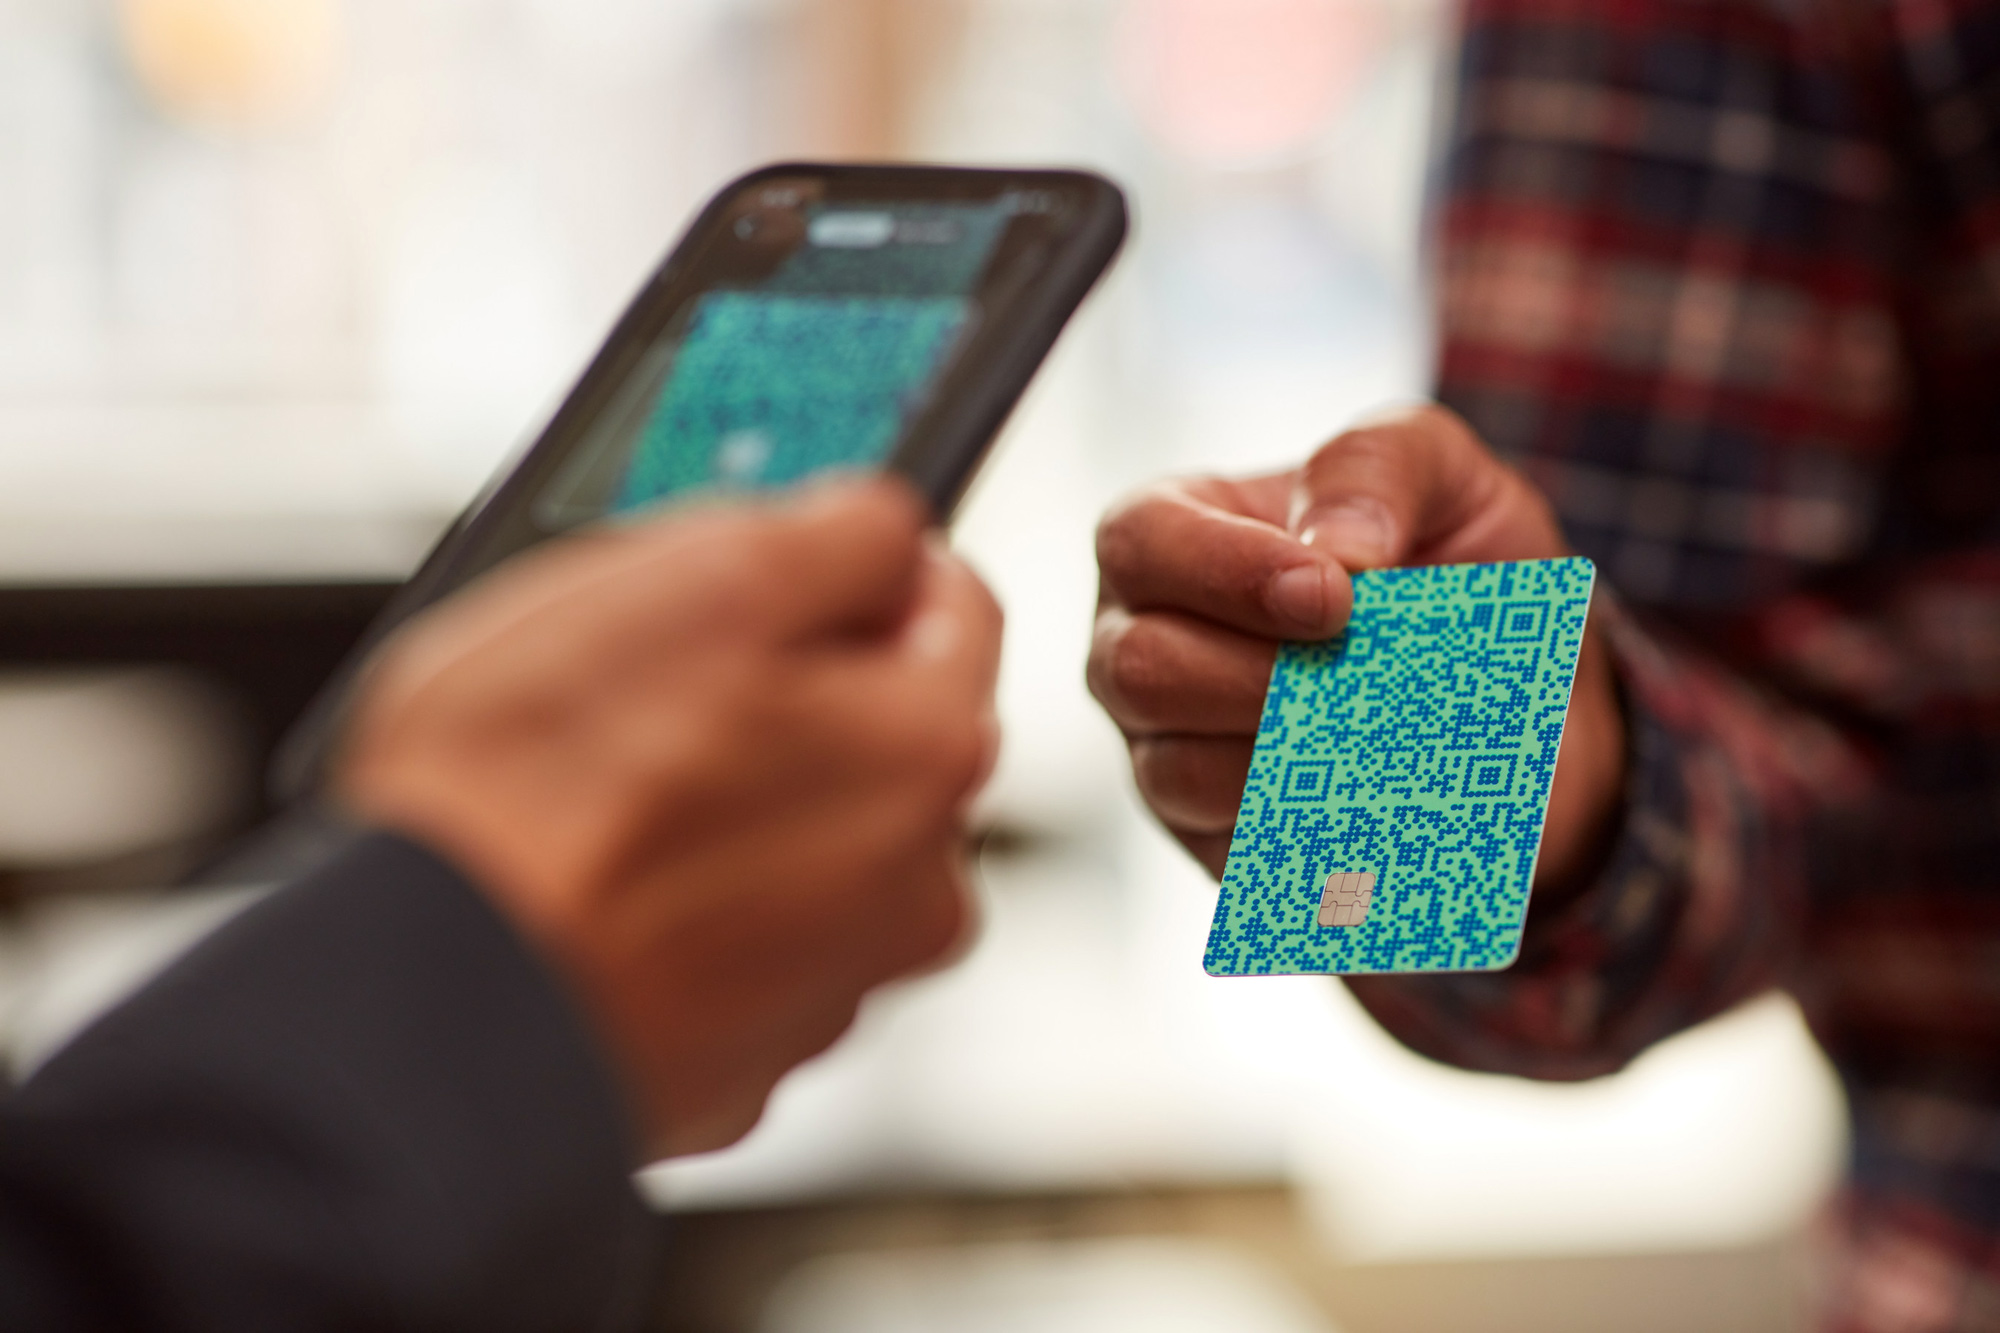 relates to Venmo Unveils Digital Credit Card to Leverage Smartphone Use